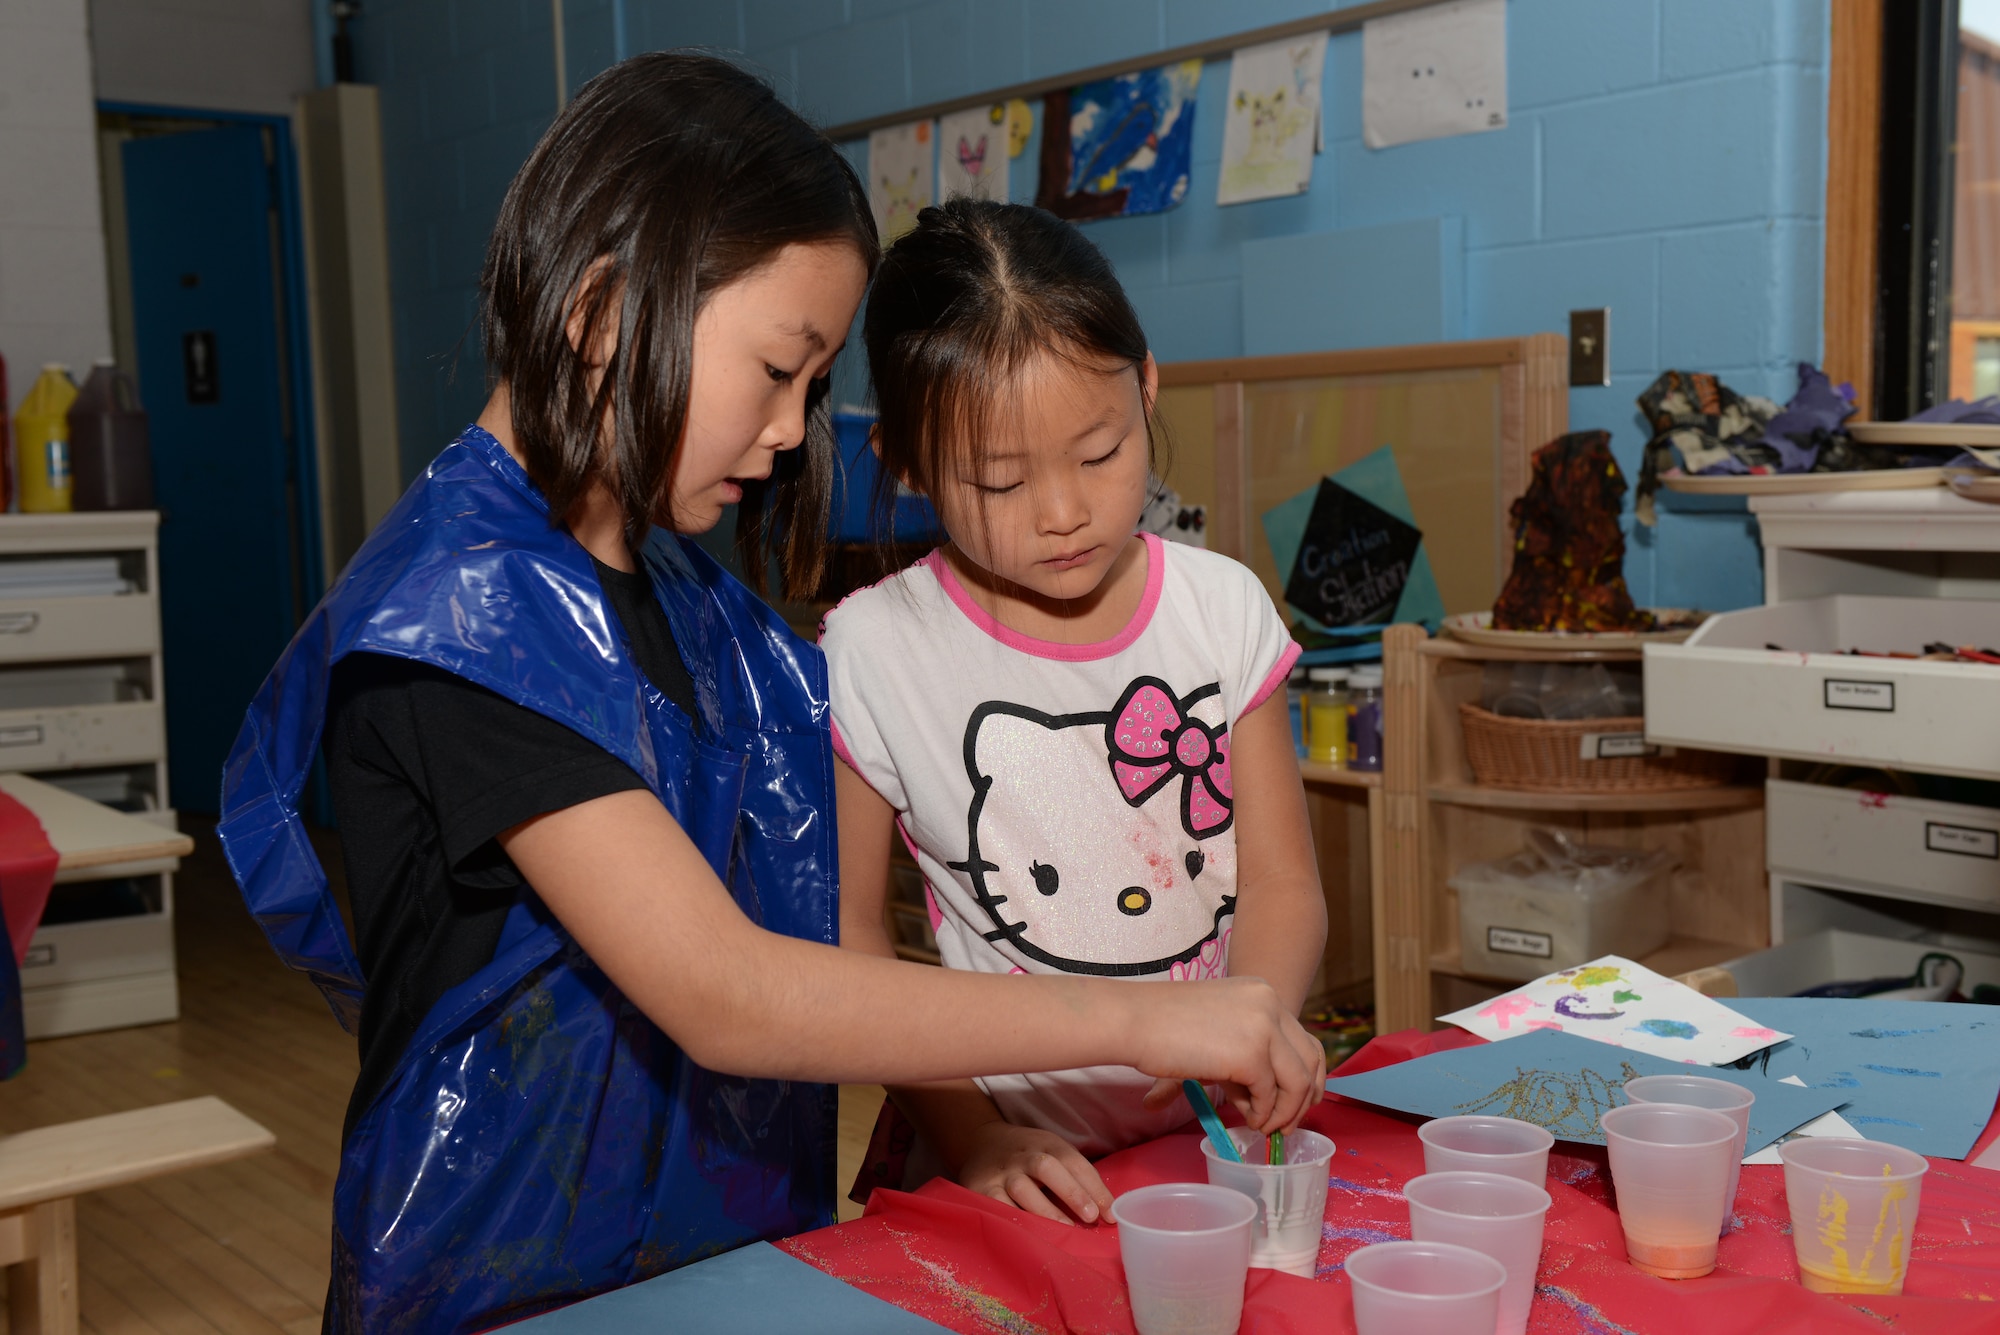 Two children paint pictures at the Youth Center on Ellsworth Air Force Base, S.D., June 13, 2018. The open recreation program during the summer consists of weekly field trips off base, family bonding events and weeklong specialty camps specializing in theater or music, where students can practice their talents in a professional recording studio. (U.S. Air Force photo by Airman 1st Class Nicolas Z. Erwin)